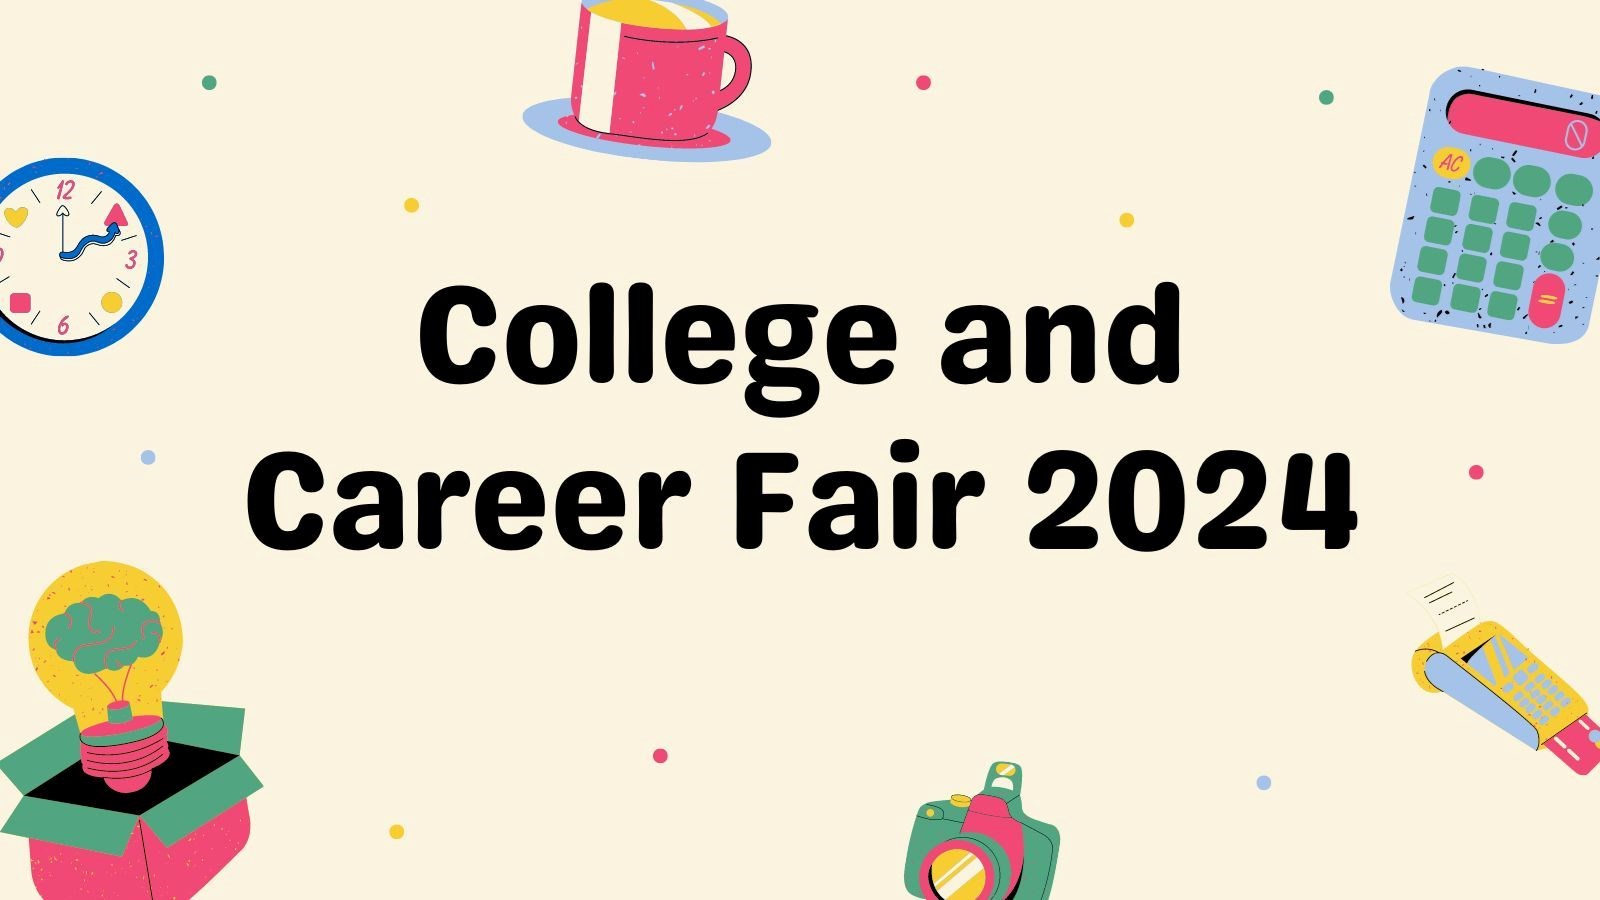 College and Career Fair 2024